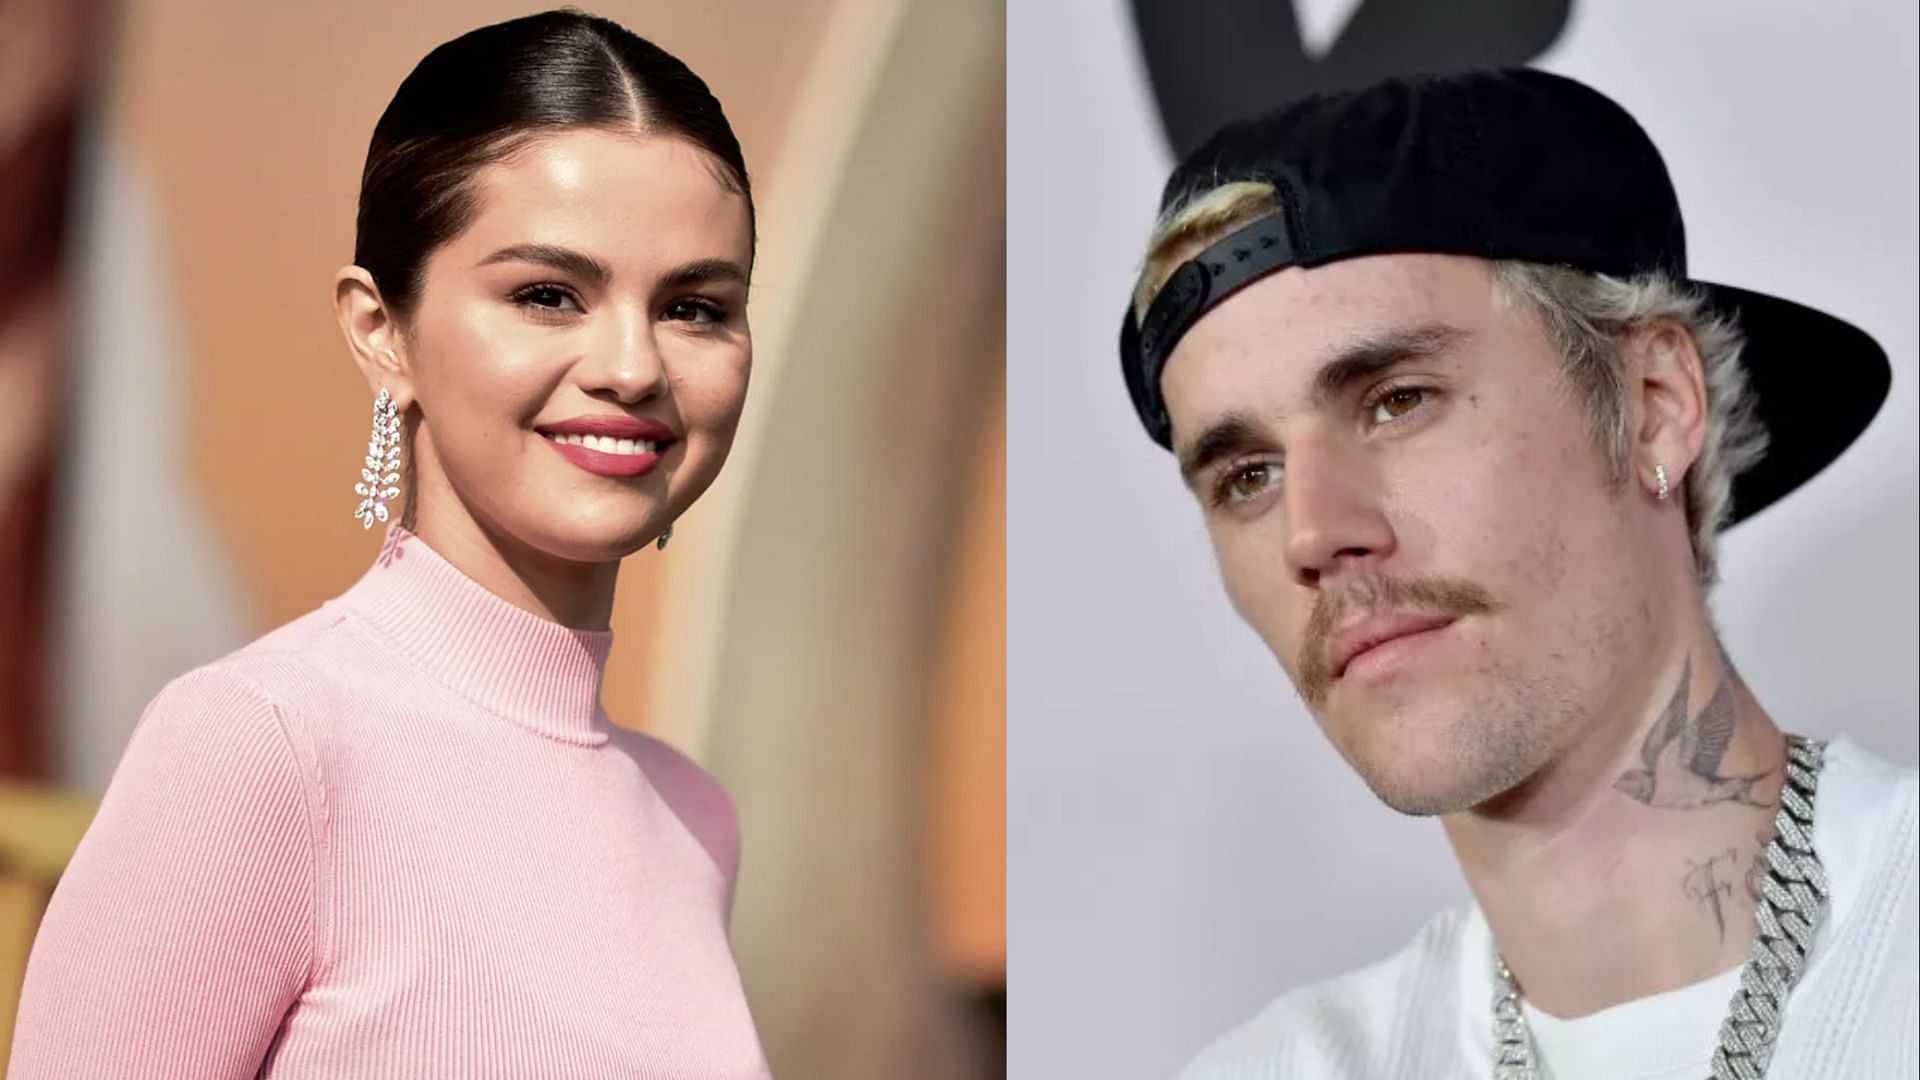 Fans go into a frenzy over Justin Bieber and Selena Gomez following each other on Twitter. (Image via Getty Images)